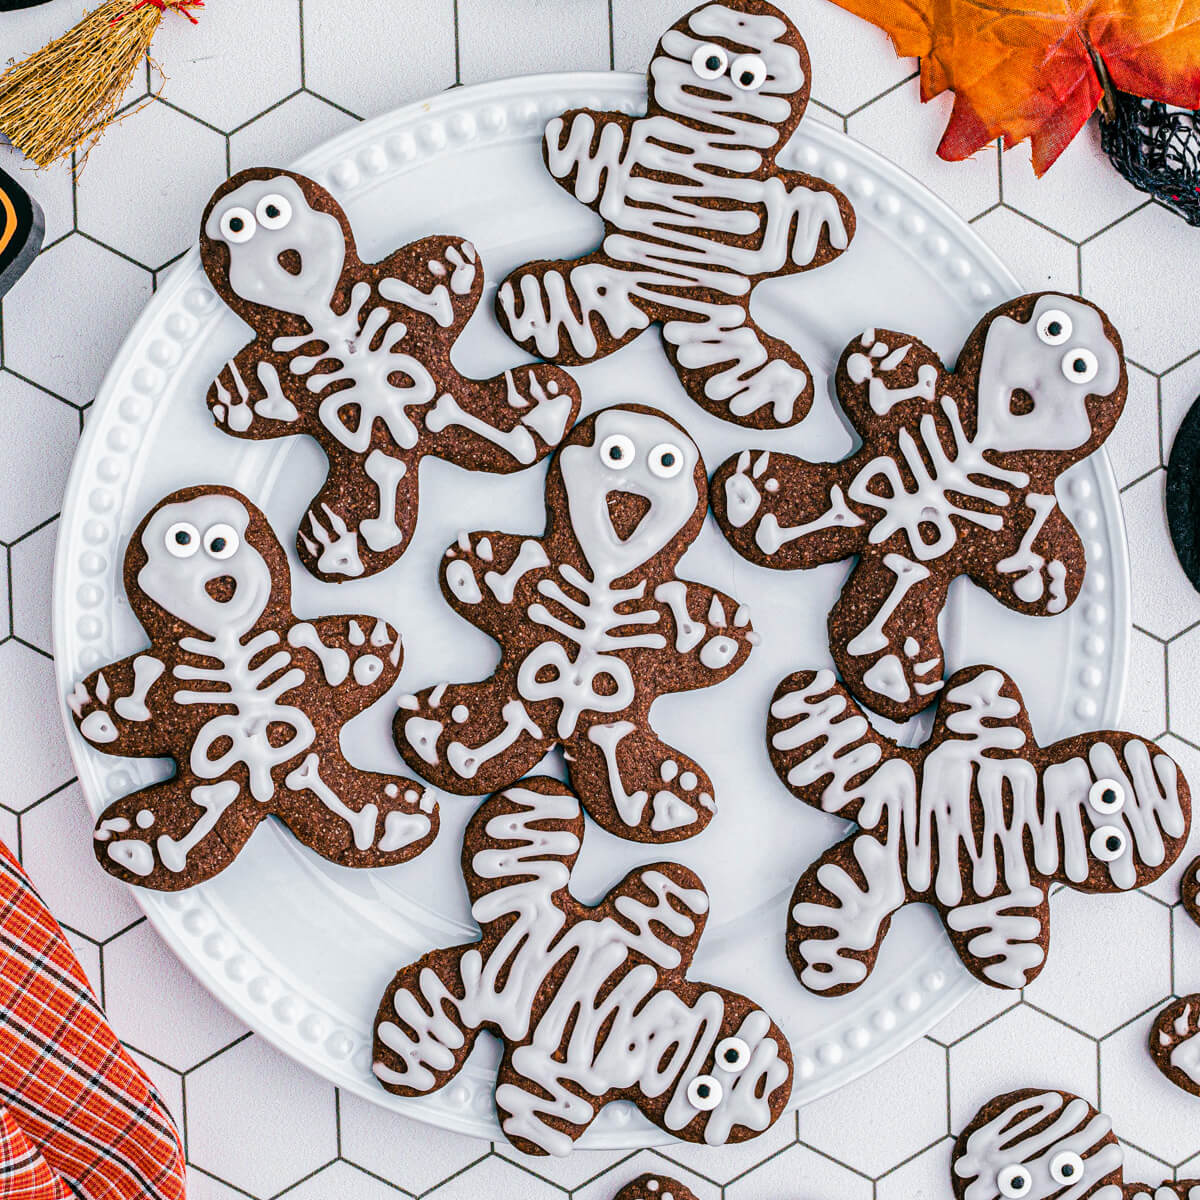 A plate of Chocolate Halloween Sugar Cookies decorated as mummies and skeletons.